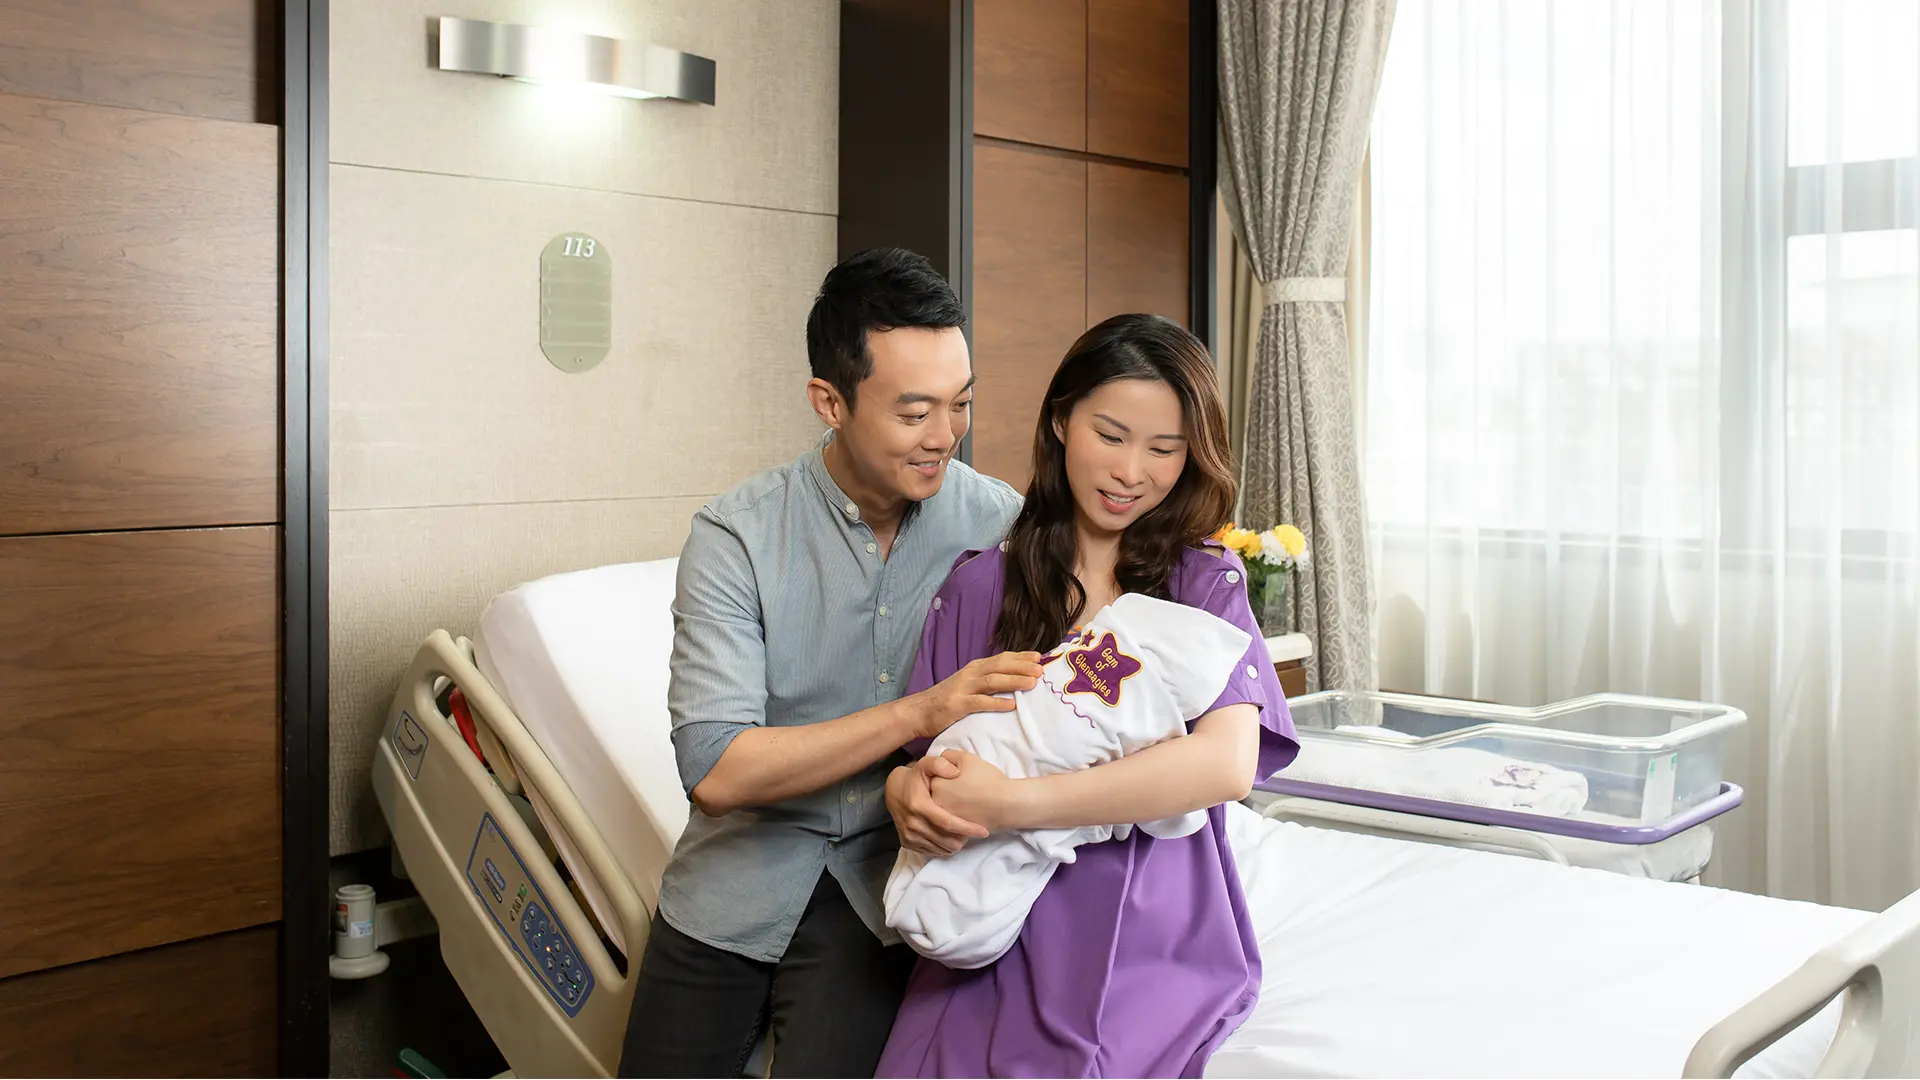 Maternity couple welcoming their baby in a comfortable and spacious maternity room